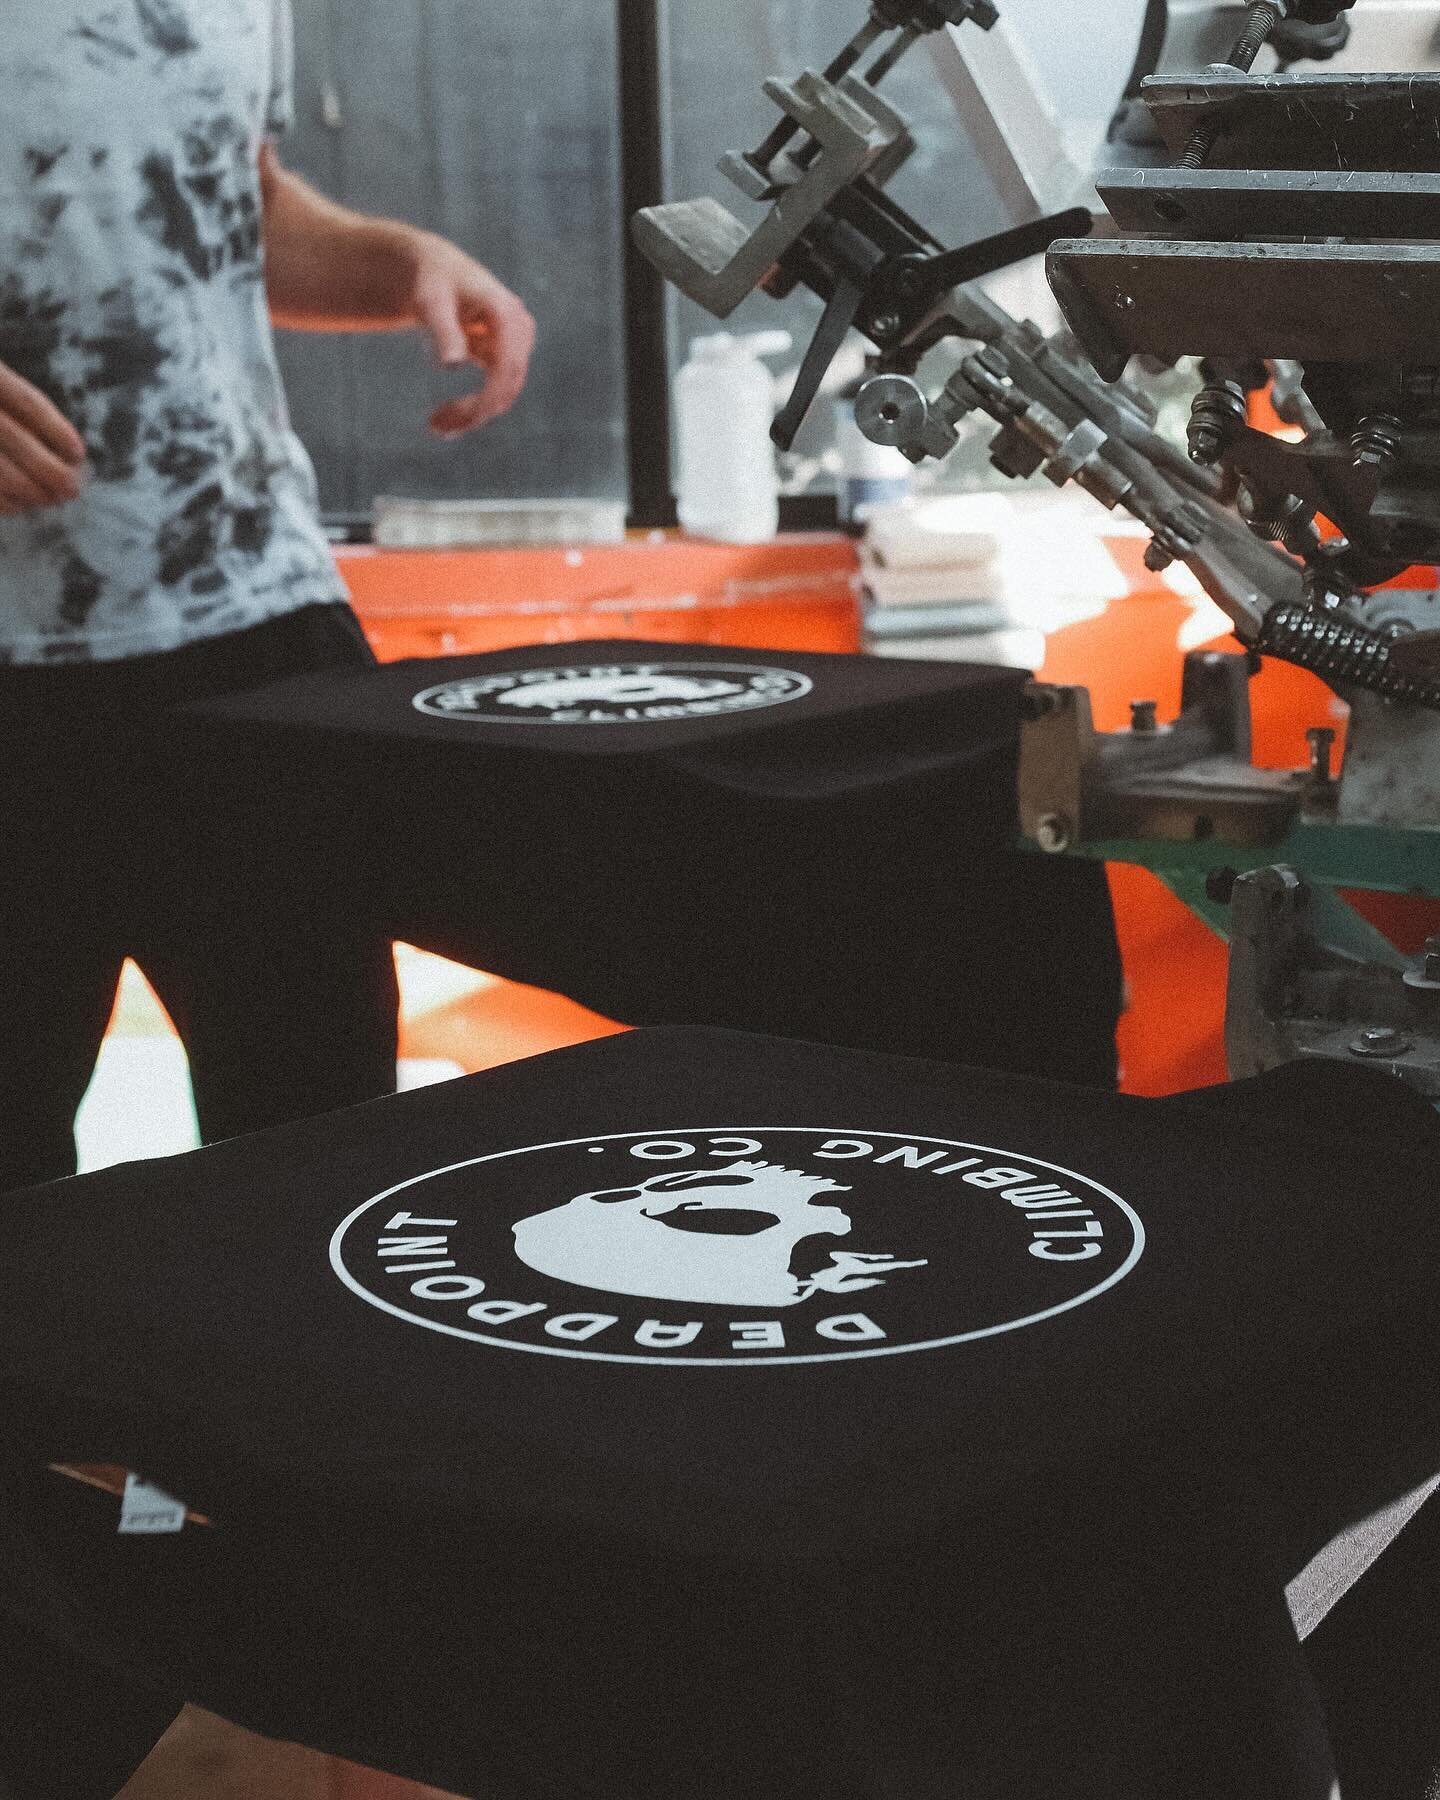 Heyooo! They&rsquo;ve done it again! 

Here&rsquo;s a little teaser of the incoming drop from our friends @deadpointclimbingco 💀

We&rsquo;re constantly inspired by these guys, both in business and as fellow humans ✨ 

You can snatch up the new gear